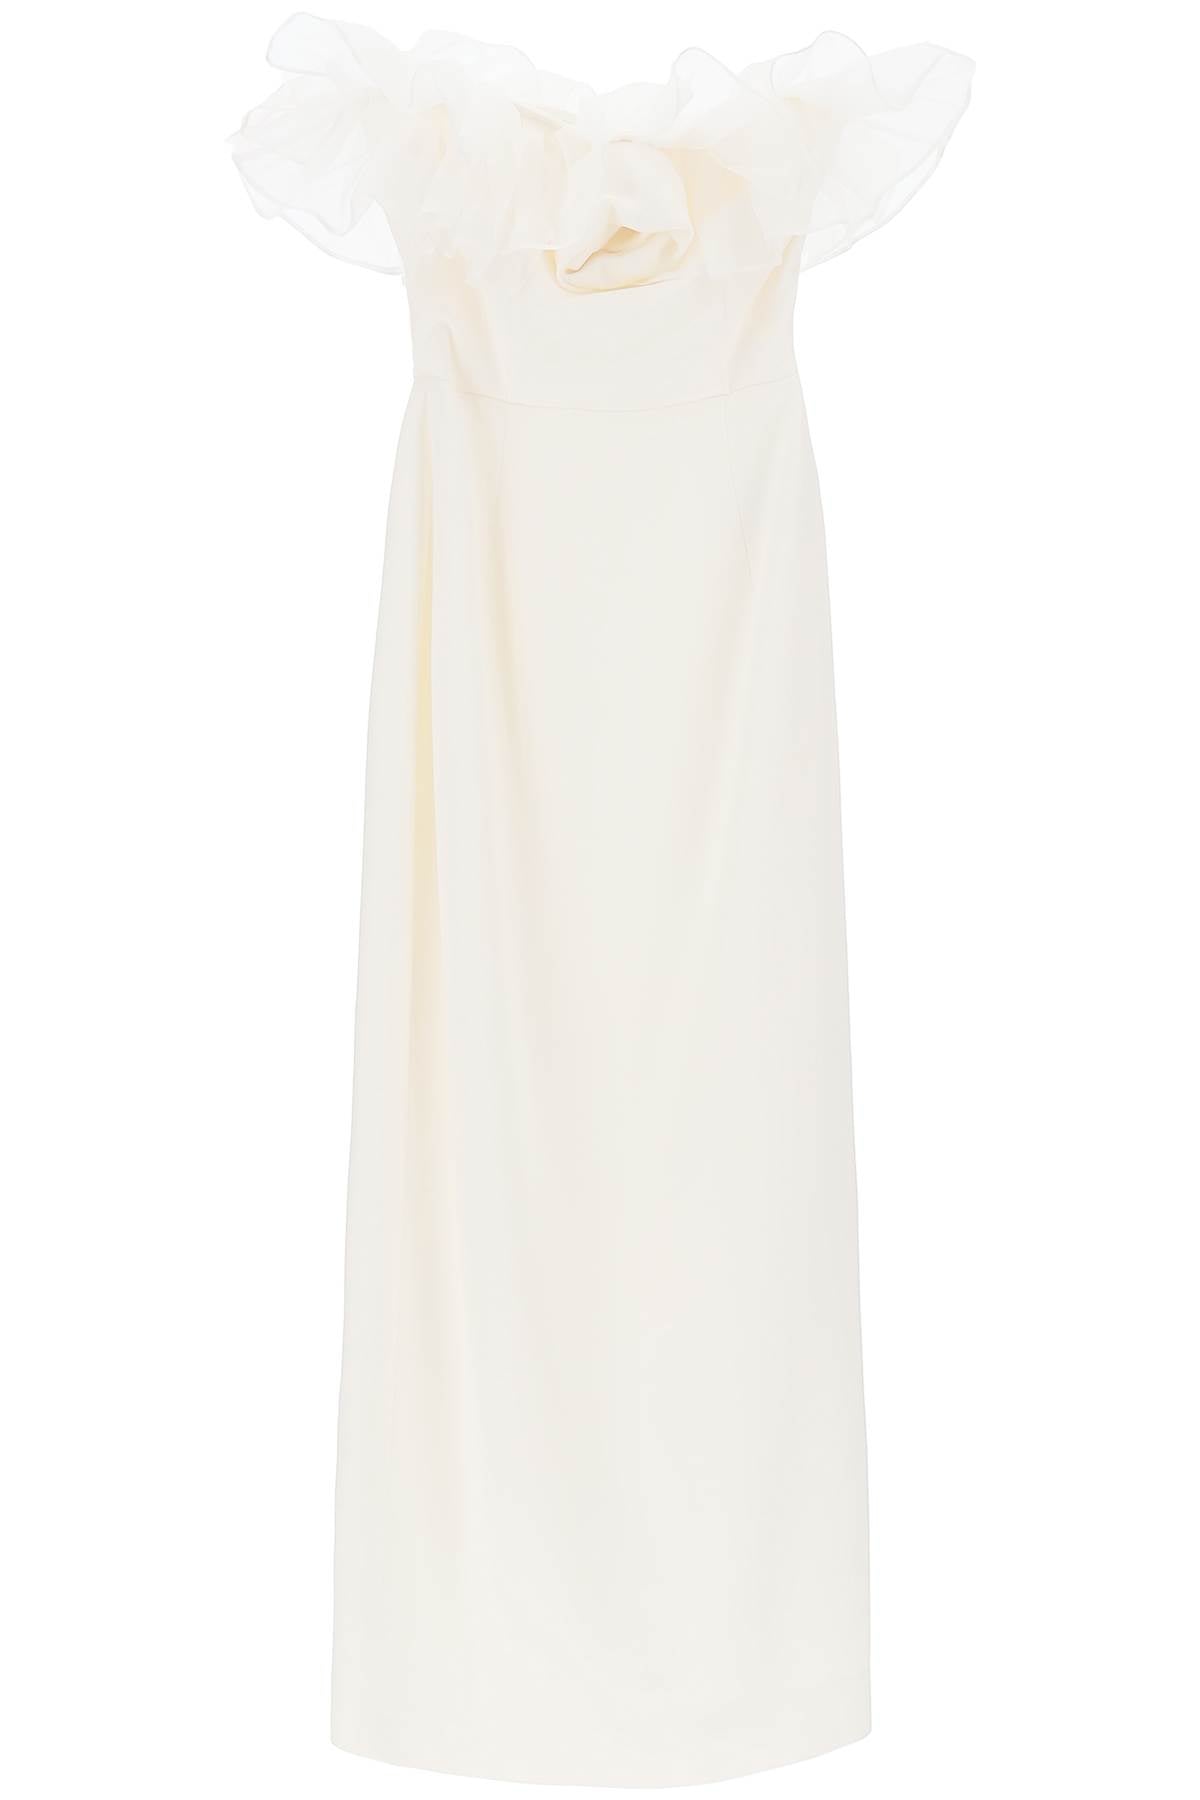 Alessandra rich strapless dress with organza details-women > clothing > dresses > maxi-Alessandra Rich-40-White-Urbanheer